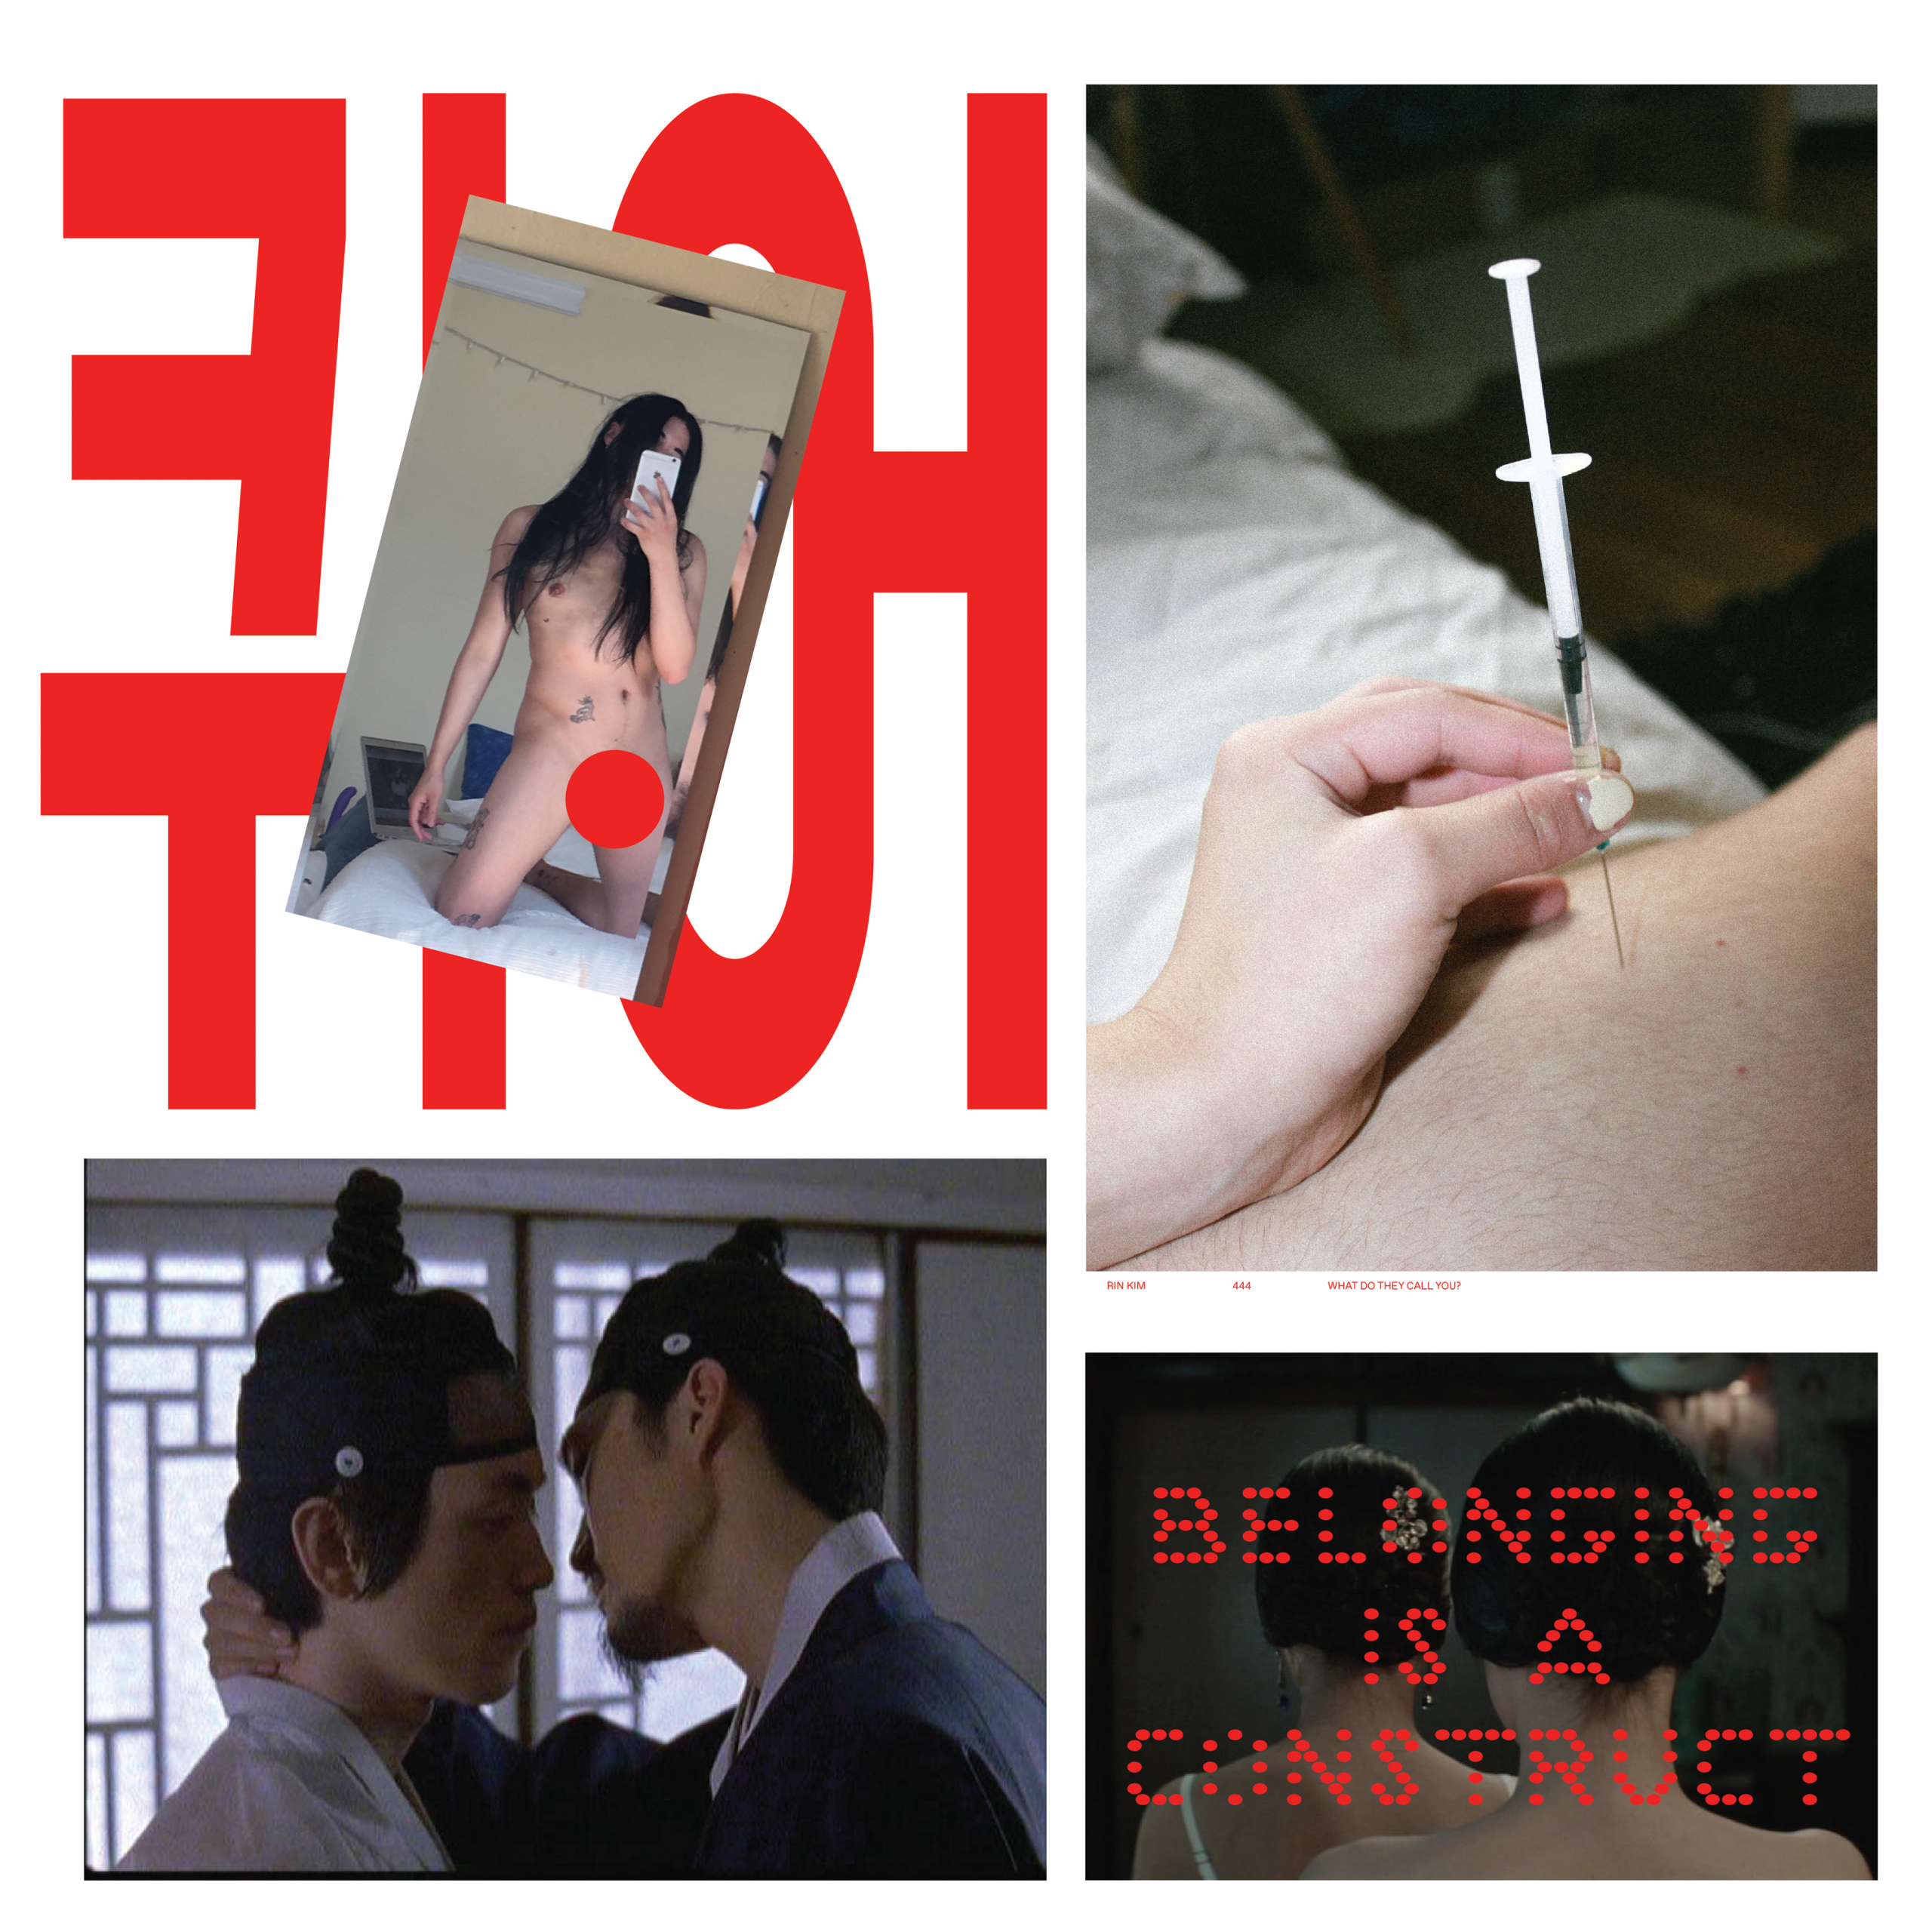 Collage of various images featuring a woman with a phone, a syringe, two people embracing, and text that says belonging is a construct